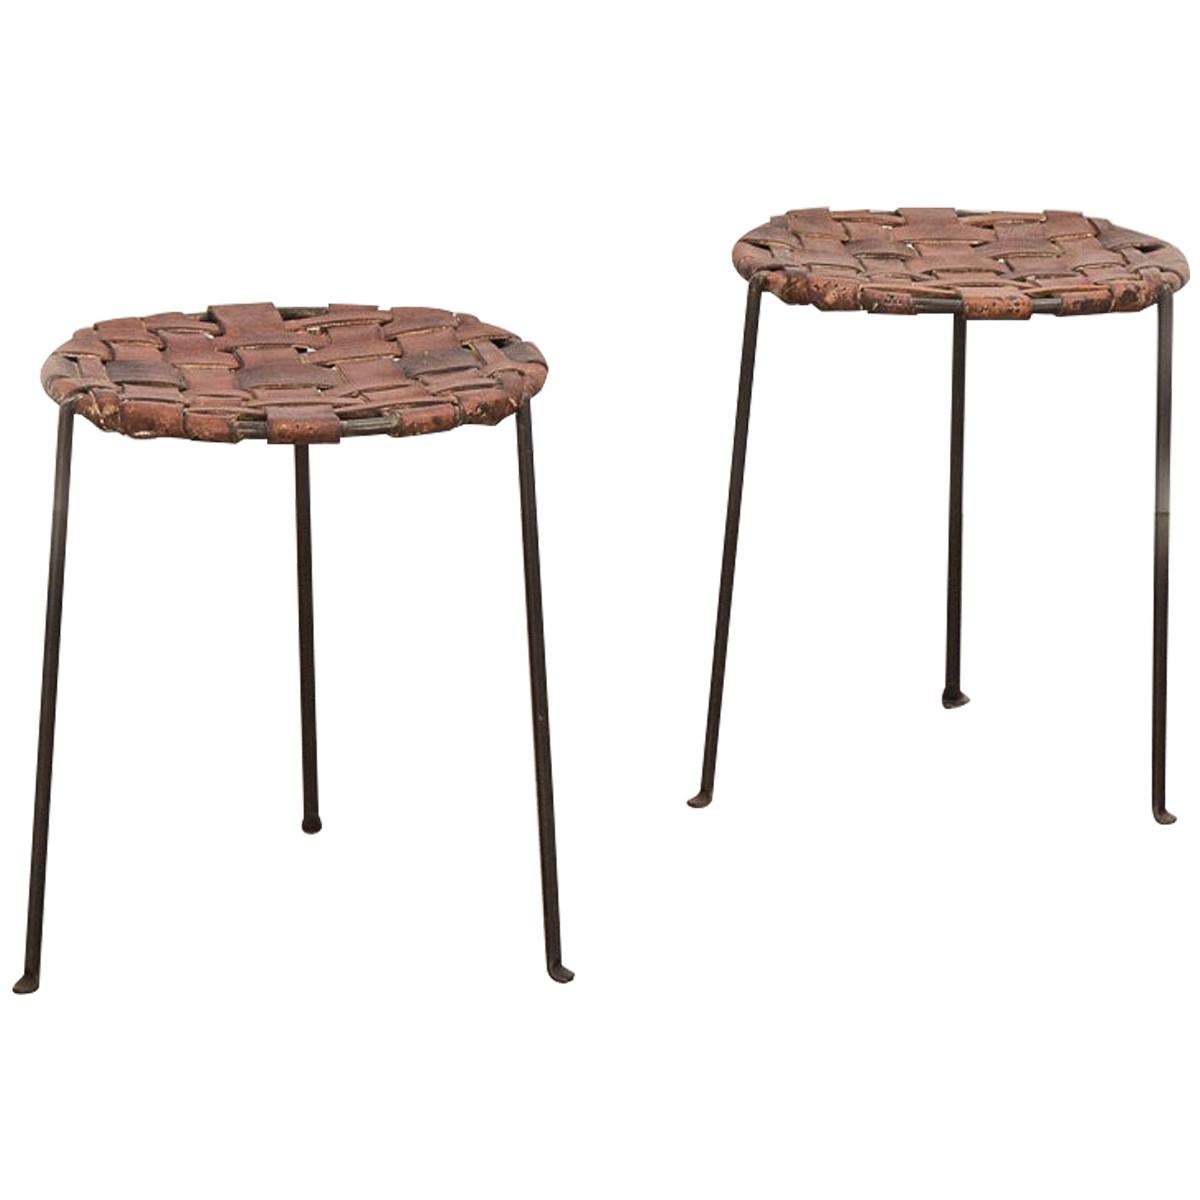 Swift and Monell Woven Leather Iron Stools For Sale